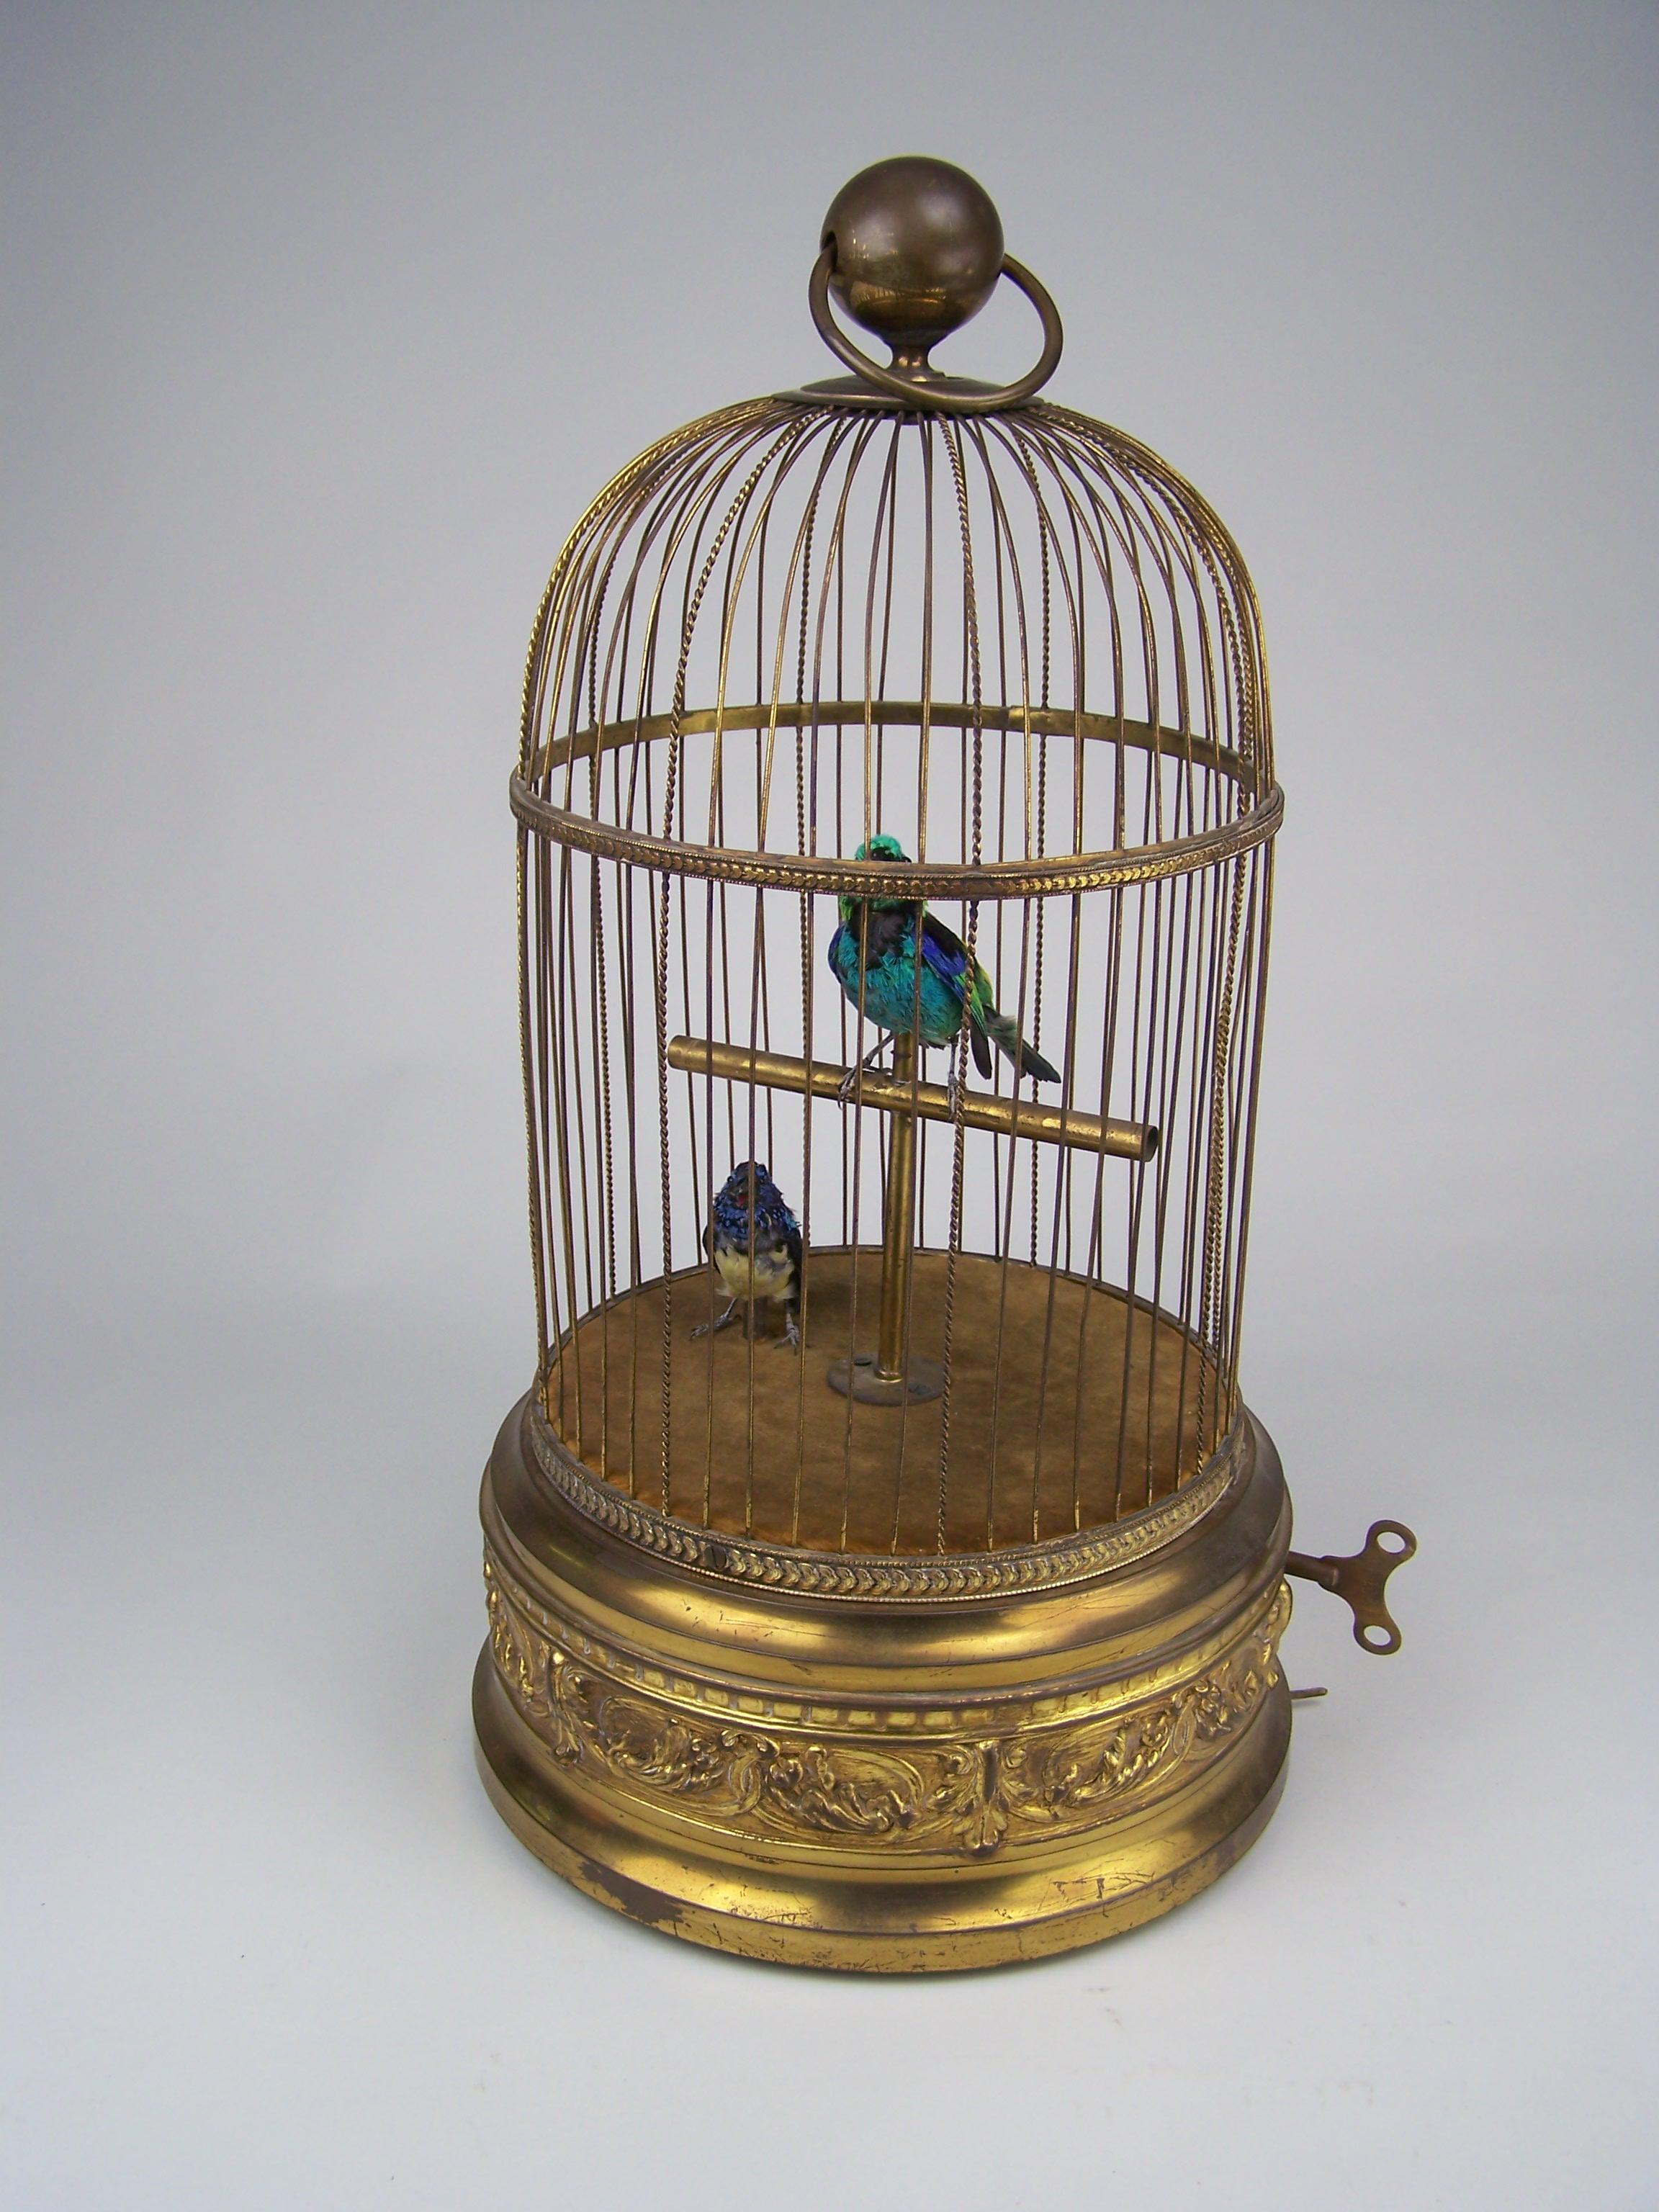 Rare and very decorative singing bird automaton.

Made in de 4th quarter of the 19th century by Bontems in Paris (France).

This top quality singing bird has a wooden gilded base to conseal the mechanism. In the cage there are 2 birds. 

The bird